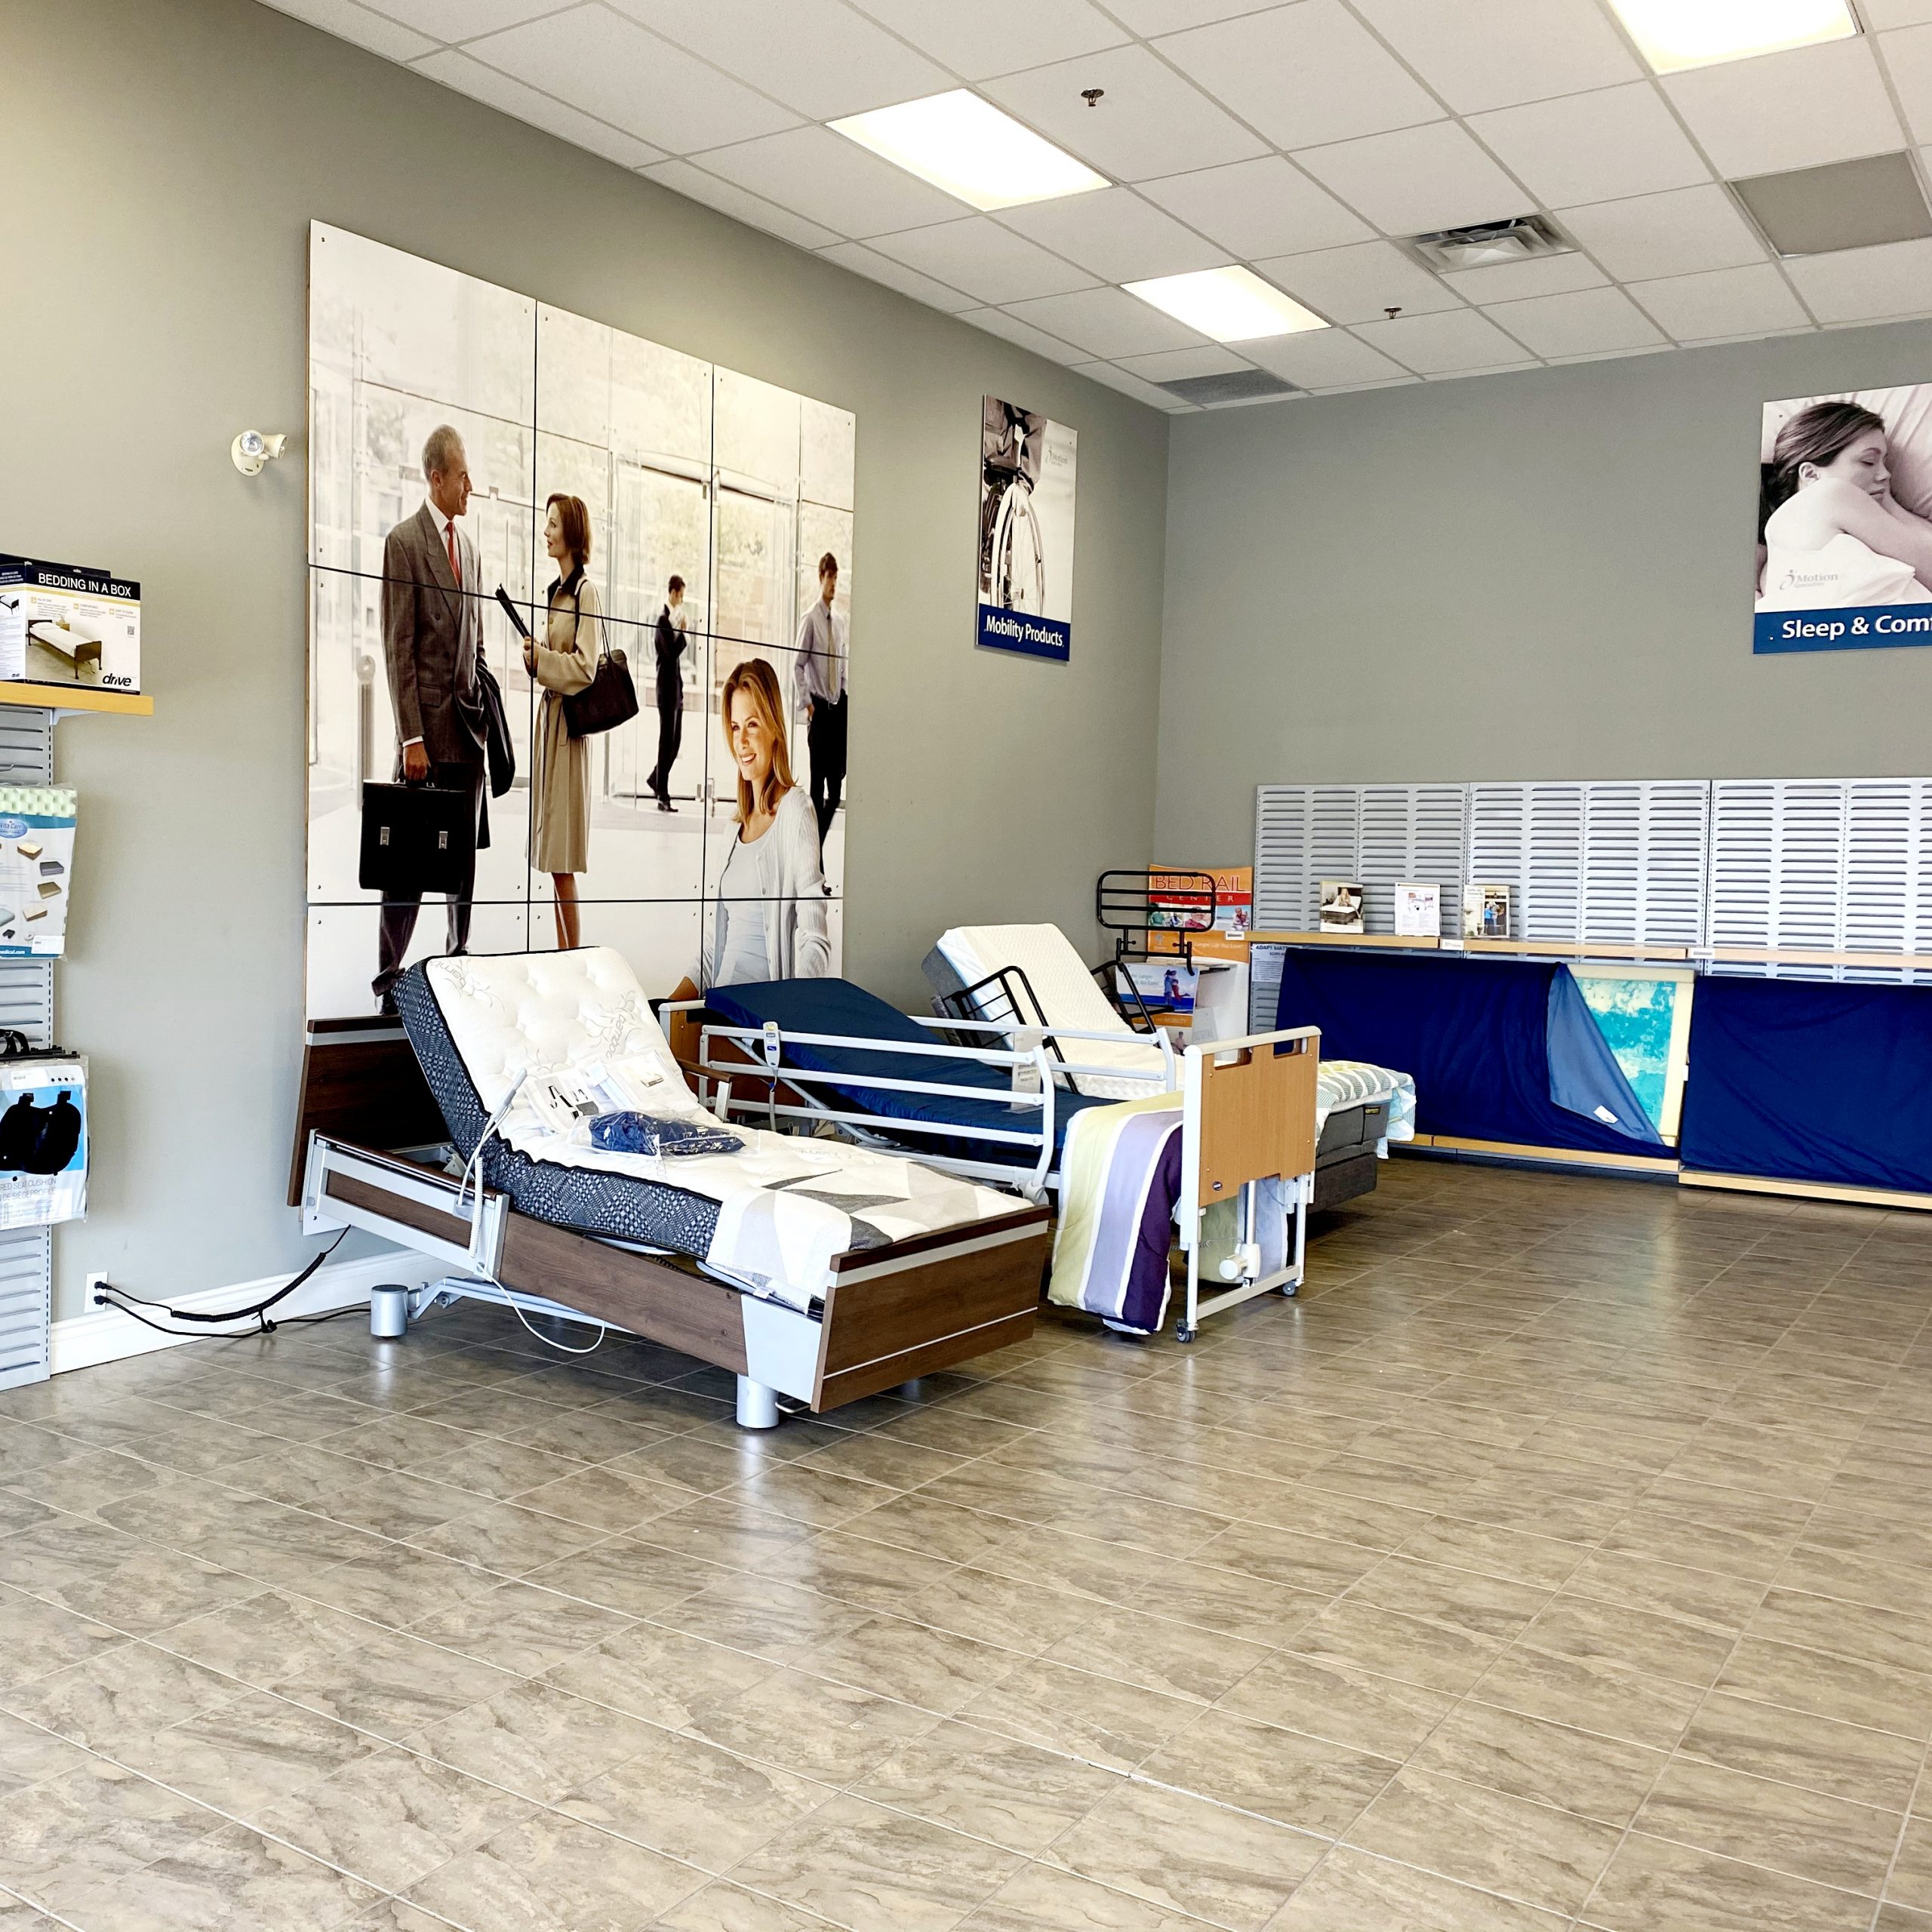 St. Catharines home care bed display in showroom